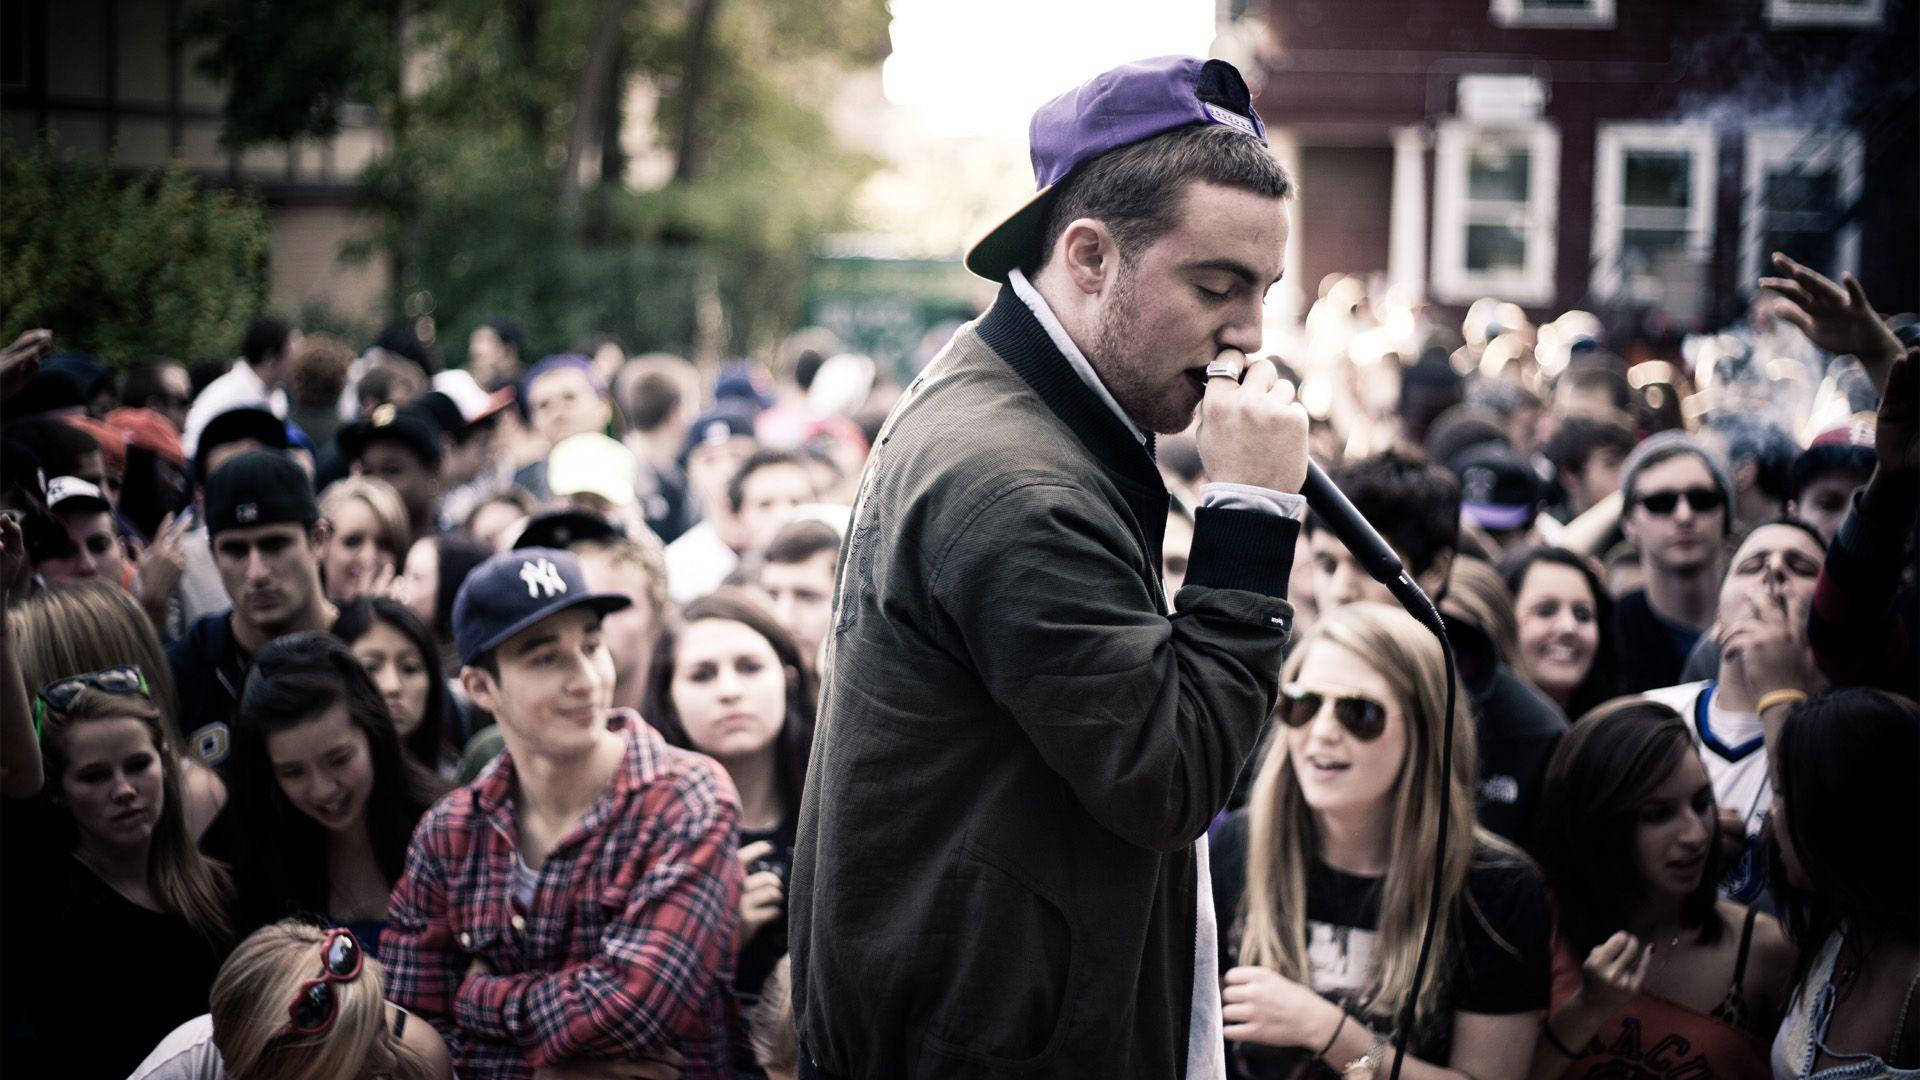 Mac Miller Performing Outdoors With Crowd